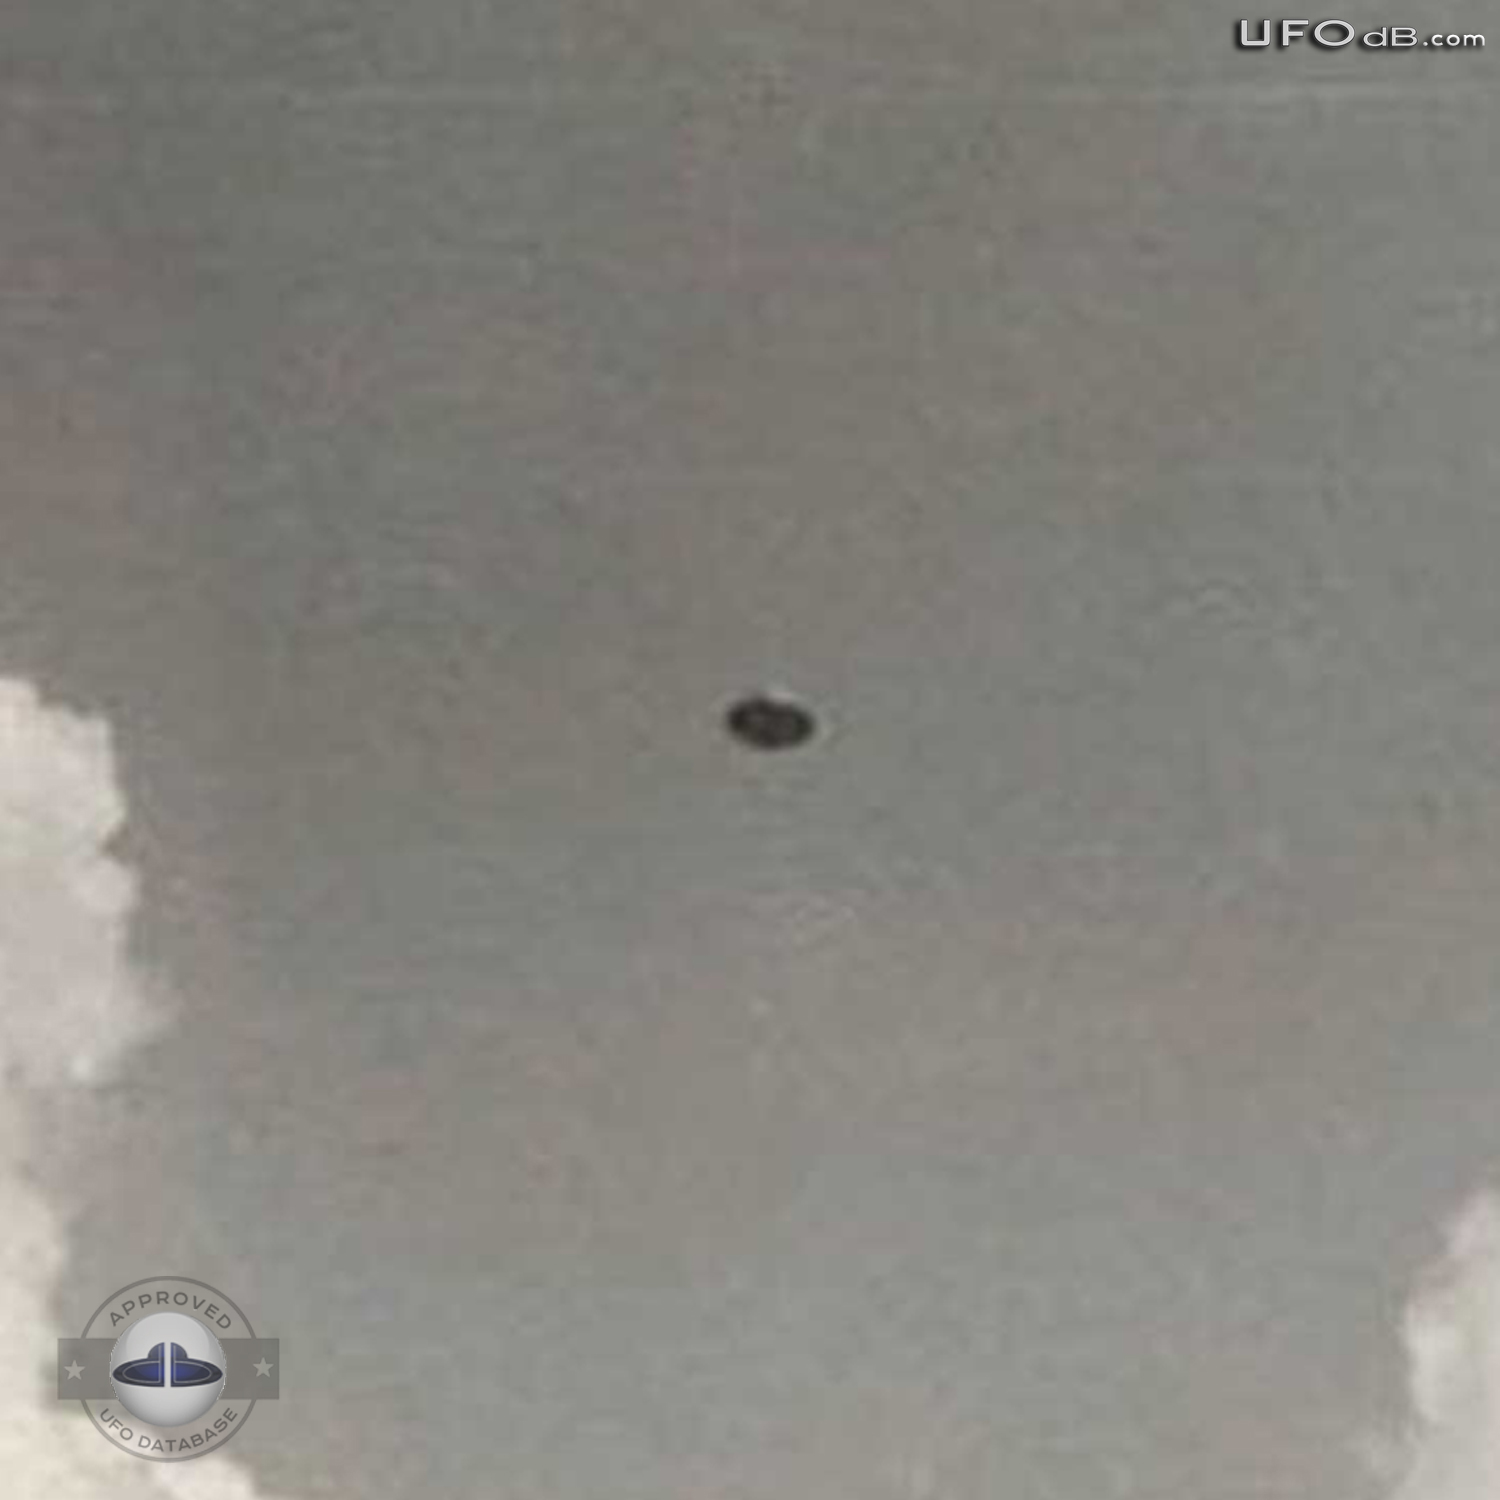 Old Grey 1956 Saucer UFO picture from Rio de Janeiro Brazil UFO Picture #370-3